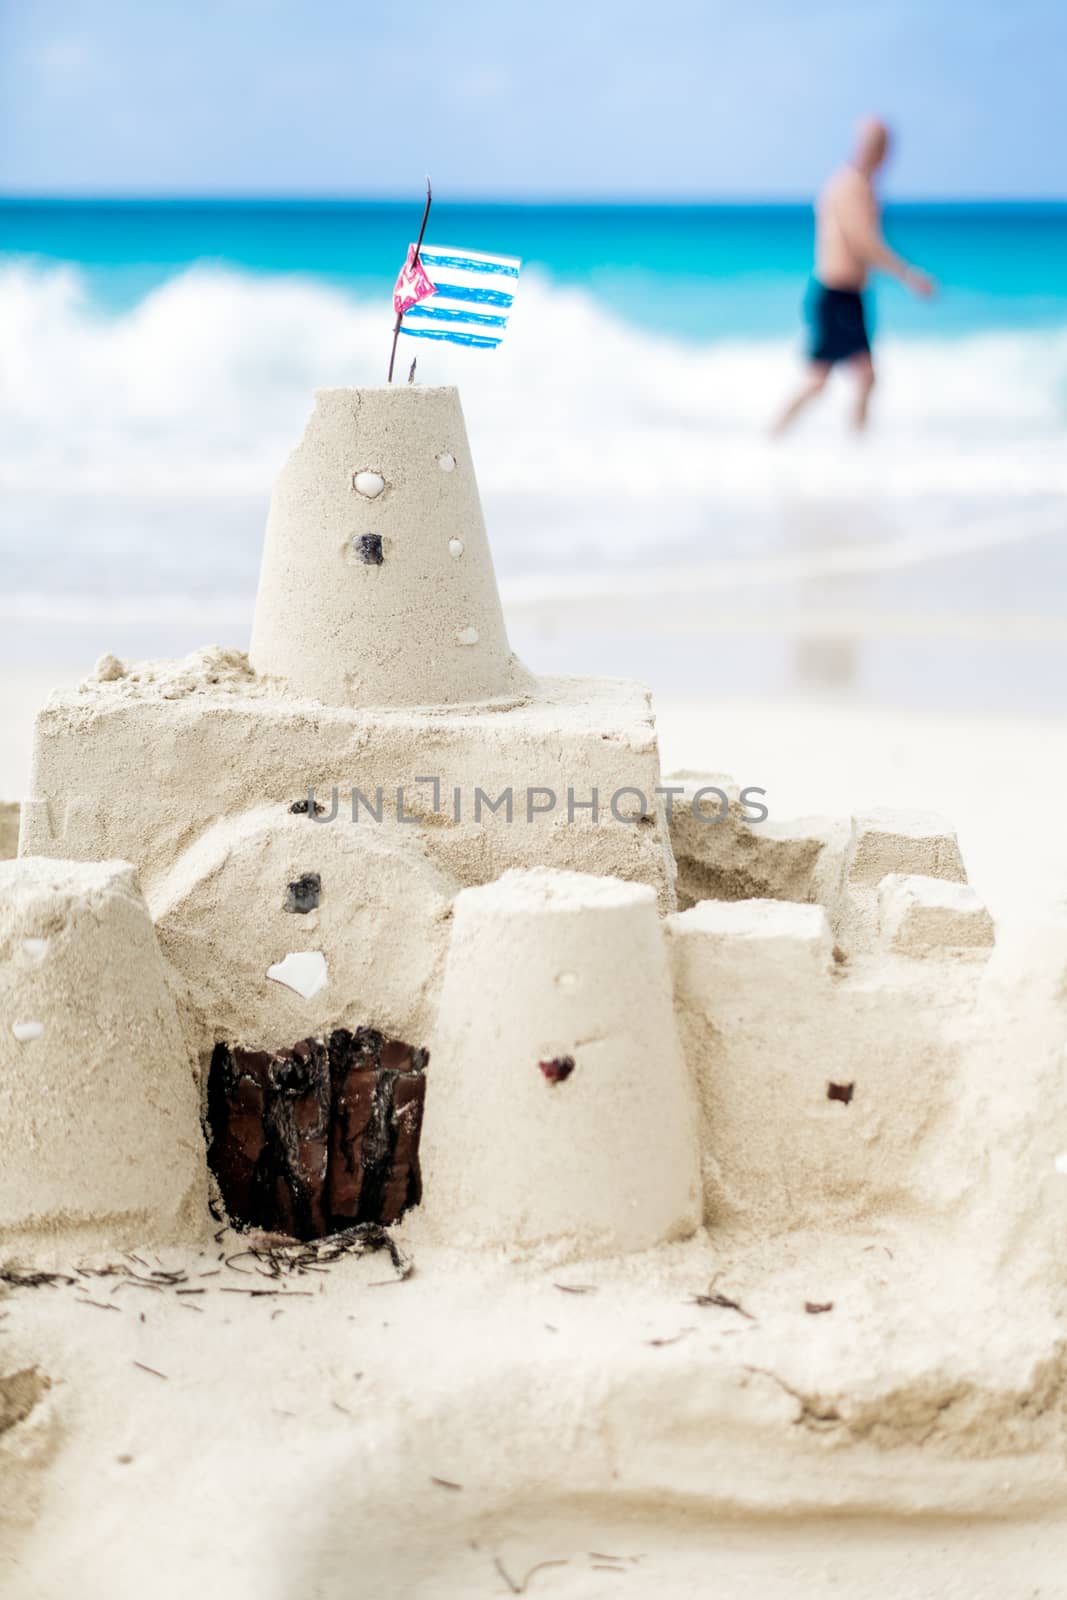 Cuban Sandcastle with the country Flag on one of the most Beautiful Beach of Cuba with a tourist in background